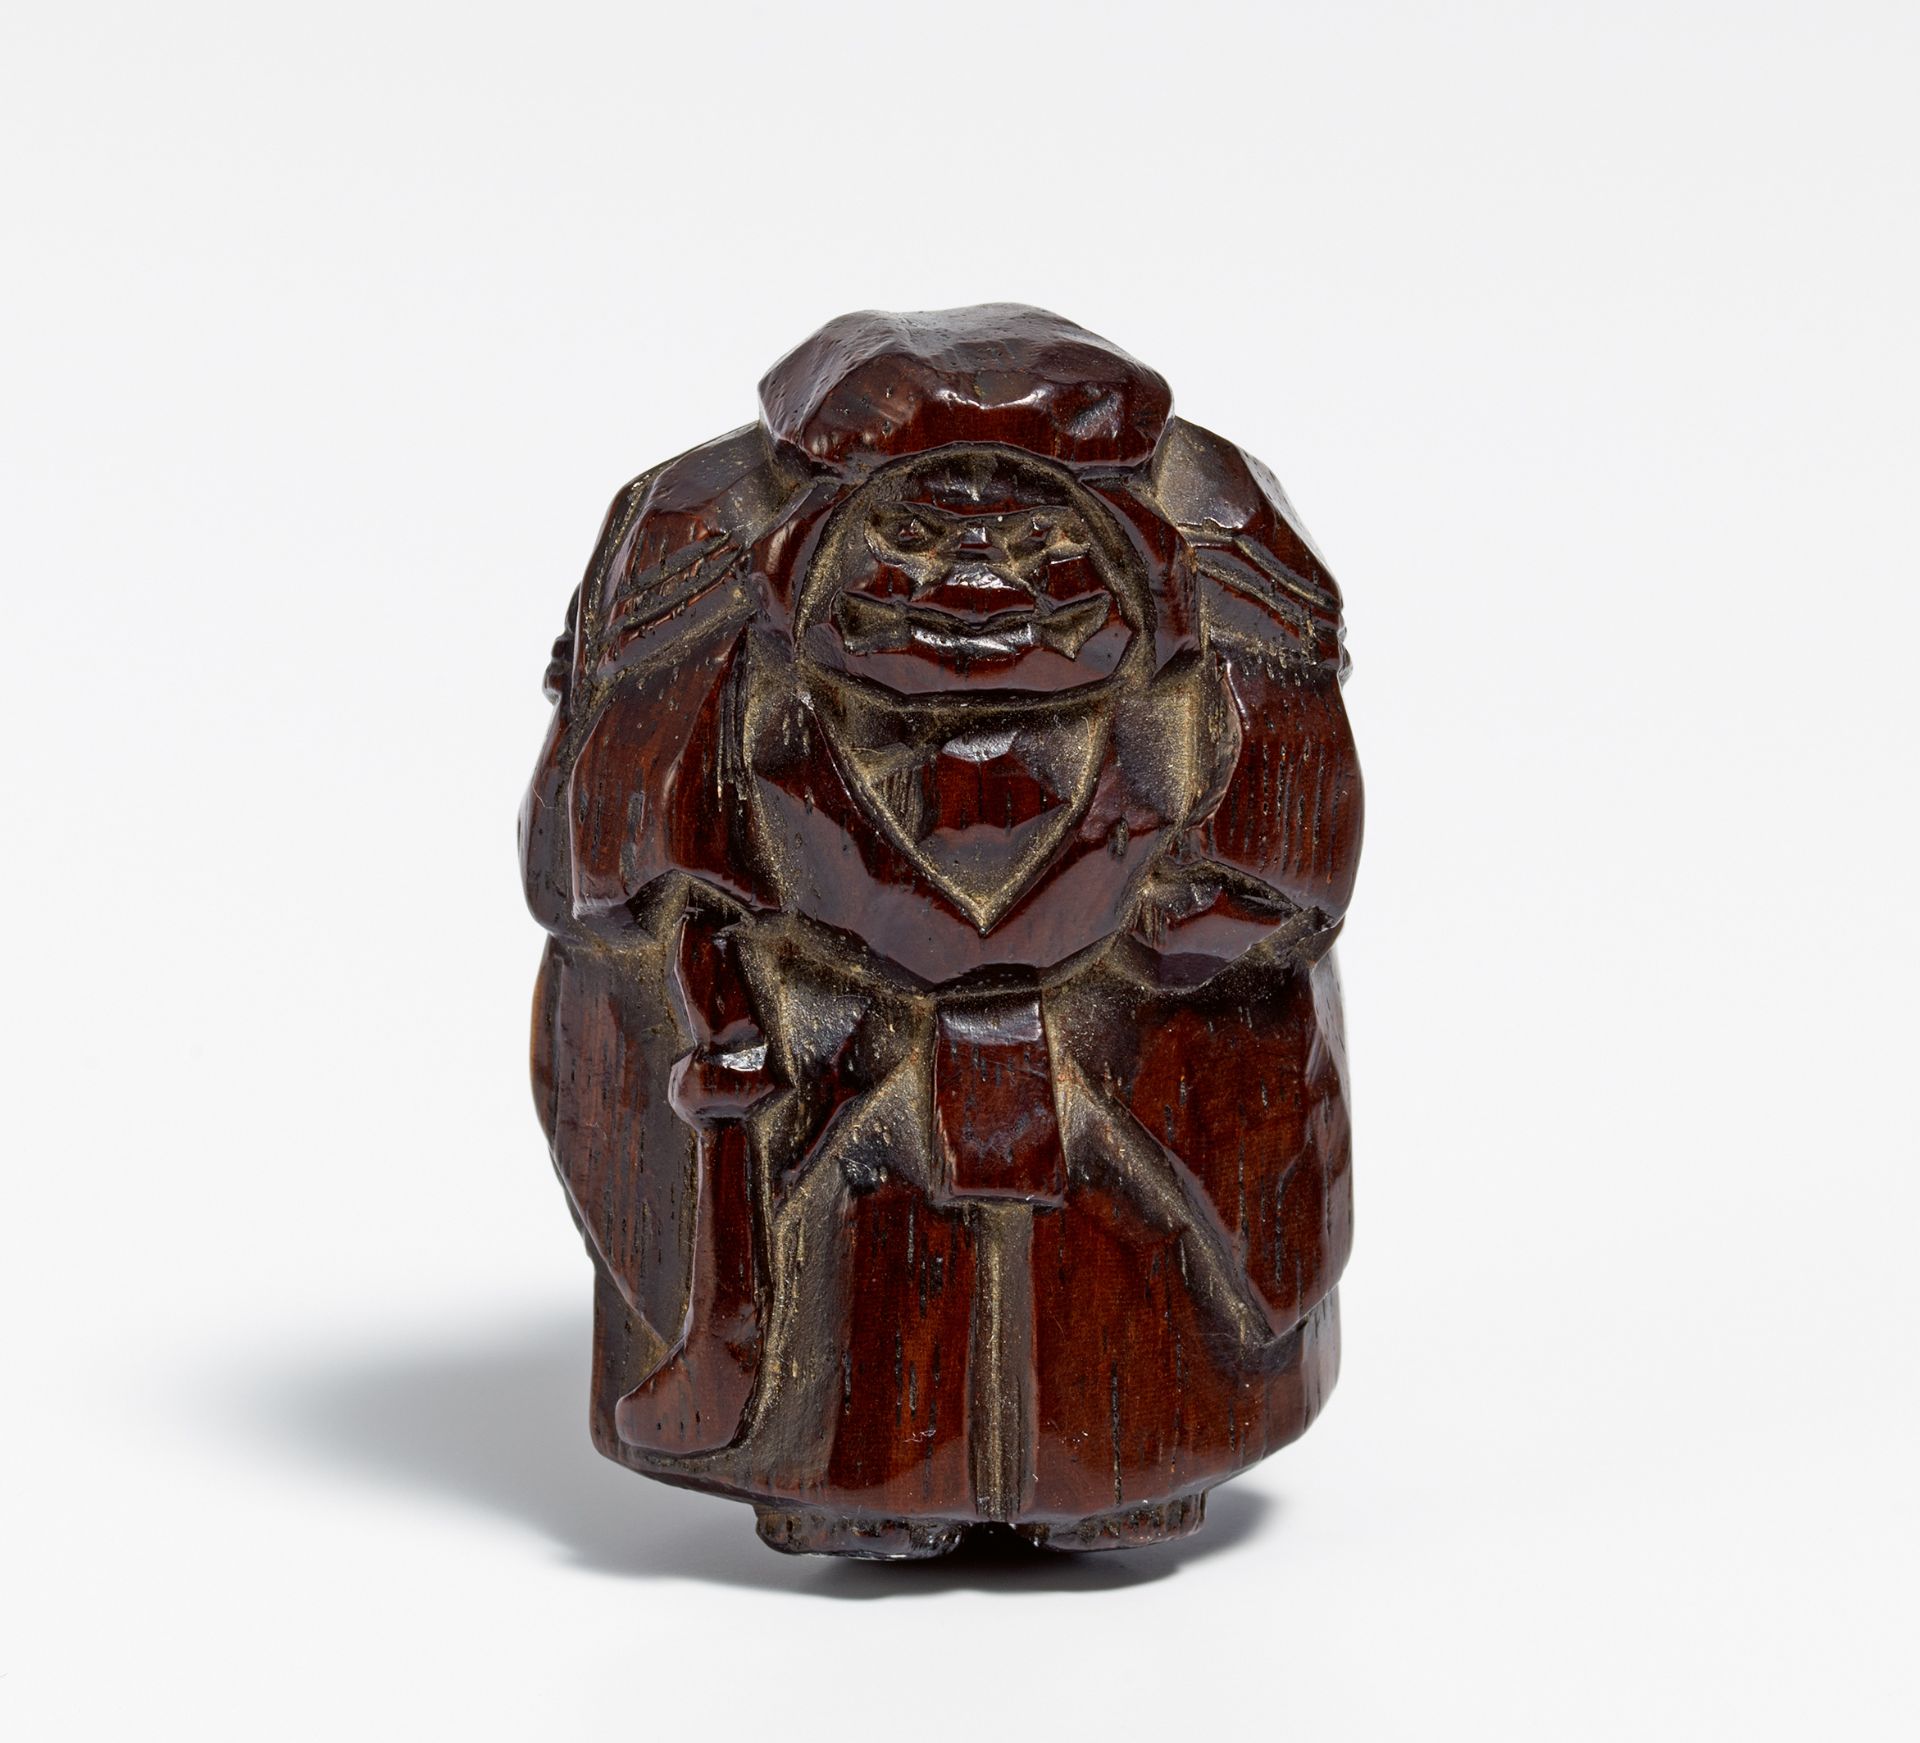 NETSUKE: NÔ ACTOR WITH SWORD. Japan. 19th c. Dark reddish brown wood with lighter colored part on